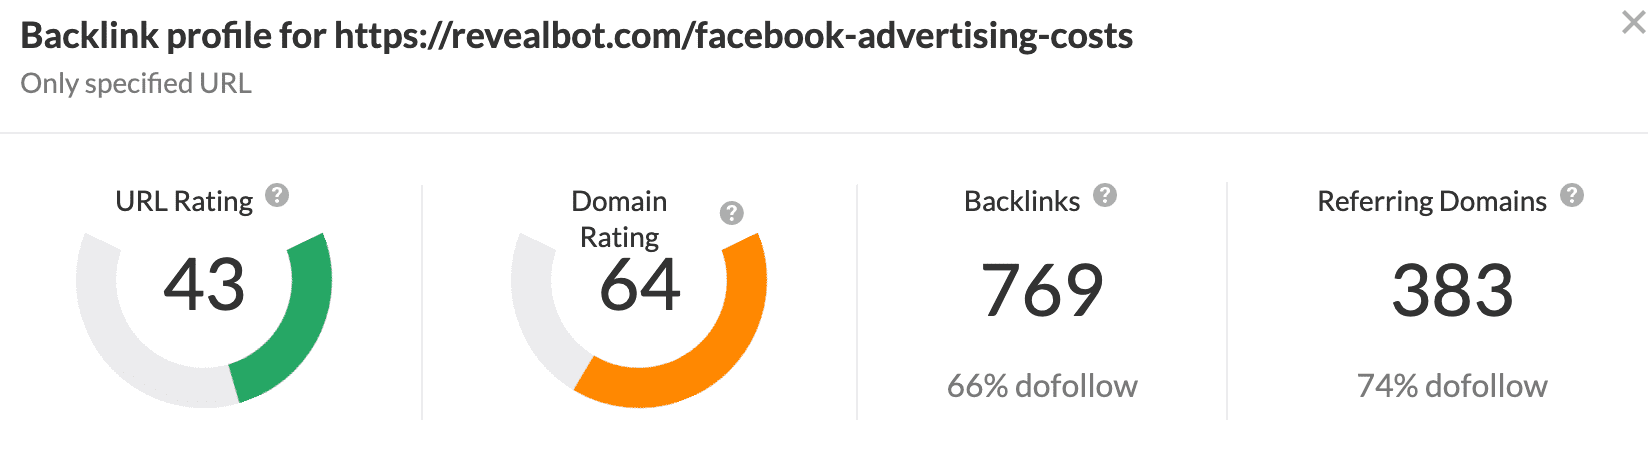 Number of domains linking to Revealbot's Facebook ad cost tool